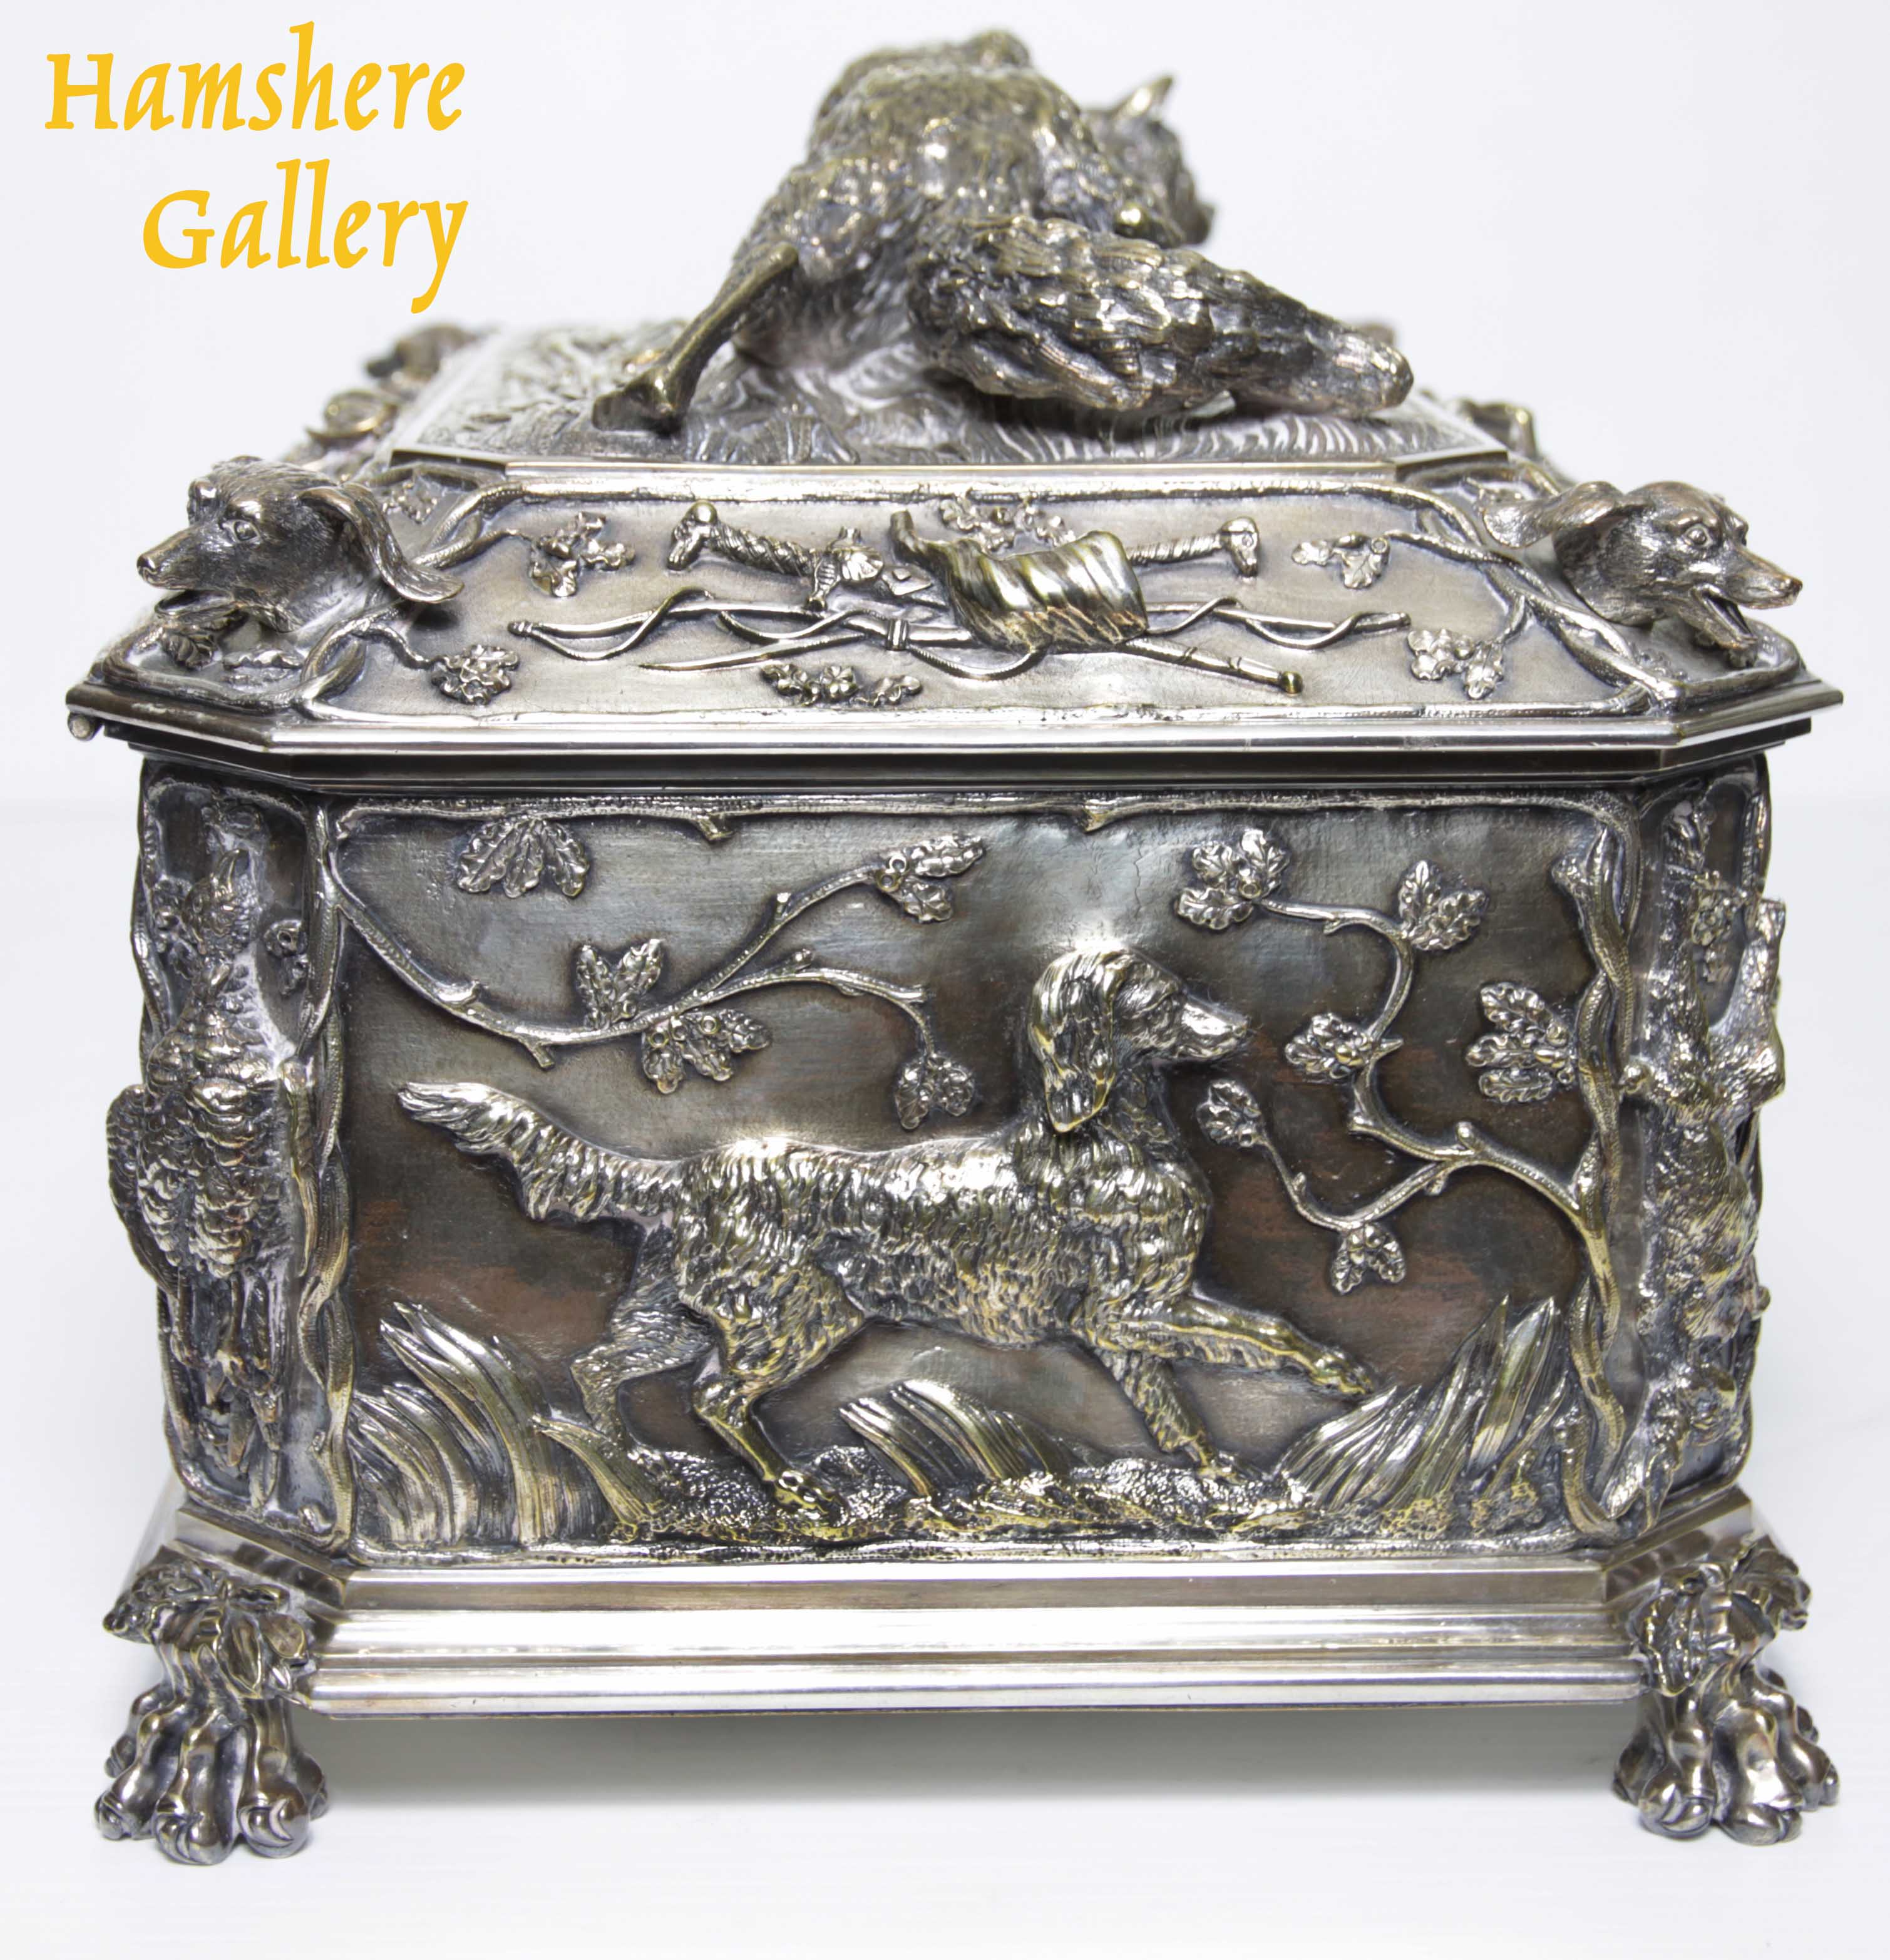 Click for larger image: A very large, French, 19th century, silver bronze hunting / “La Chasse” jewellery box / casket of boar, fox, hound and game bird, attributable to Jules Moigniez (French, 1835-1894) - A very large, French, 19th century, silver bronze hunting / “La Chasse” jewellery box / casket of boar, fox, hound and game bird, attributable to Jules Moigniez (French, 1835-1894)